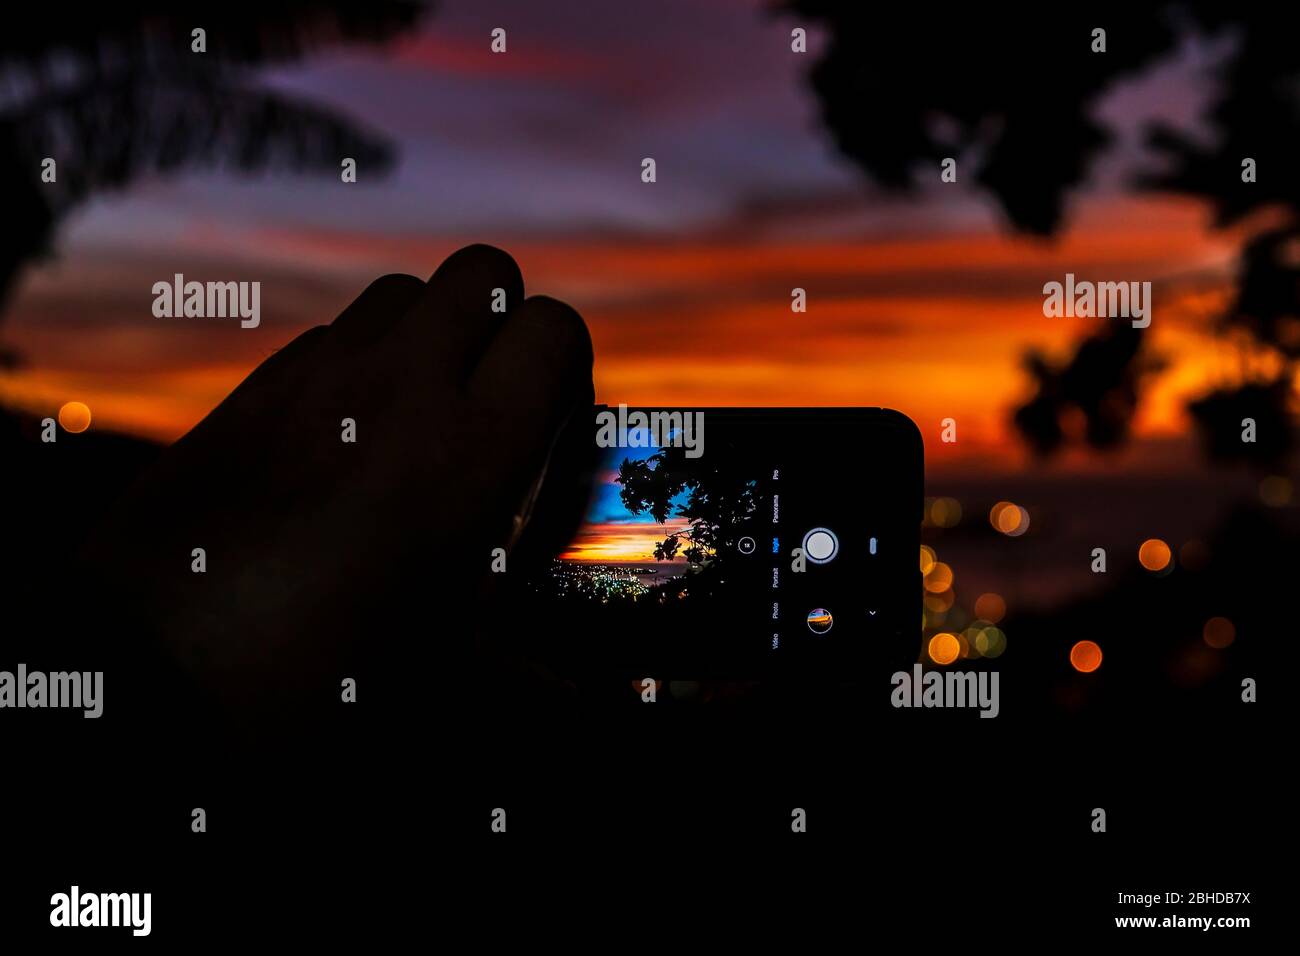 a photo of a hand holding a mobile phone displaying a picture of a sunset in focus on the screen in landscape orientation a blurry background Stock Photo